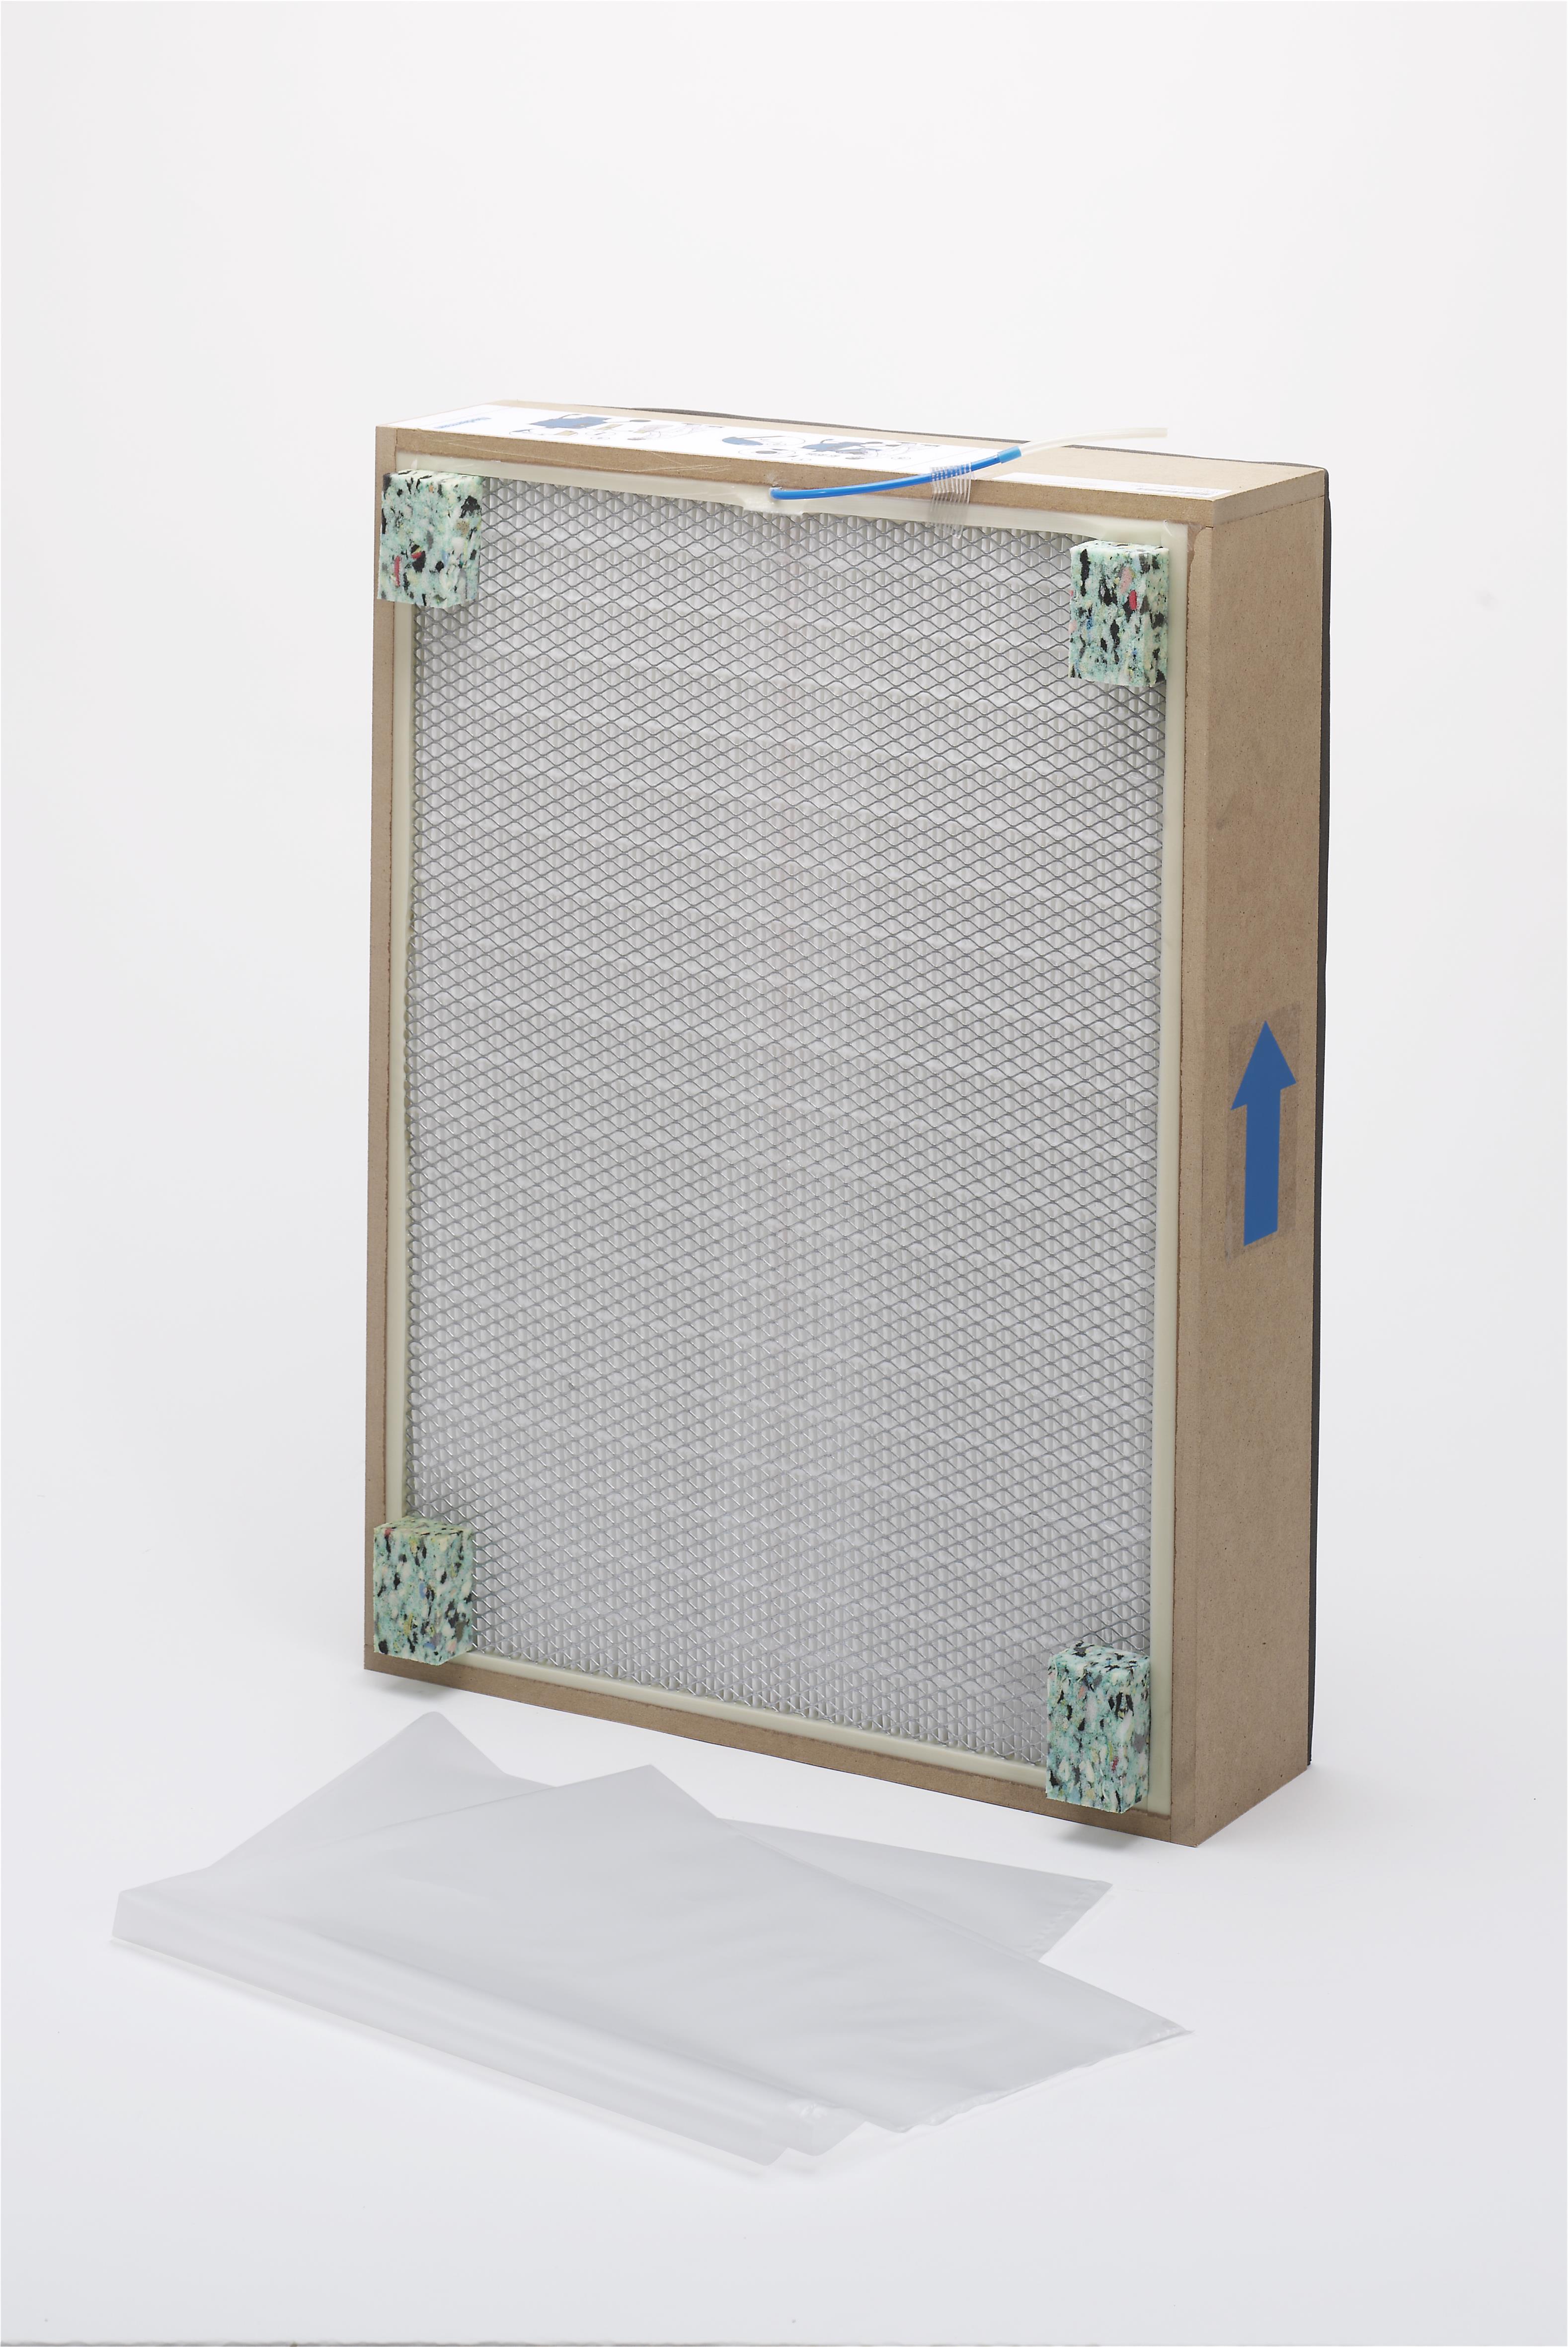 Ultra high efficiency HEPA secondary filter for FilterBox, HE15